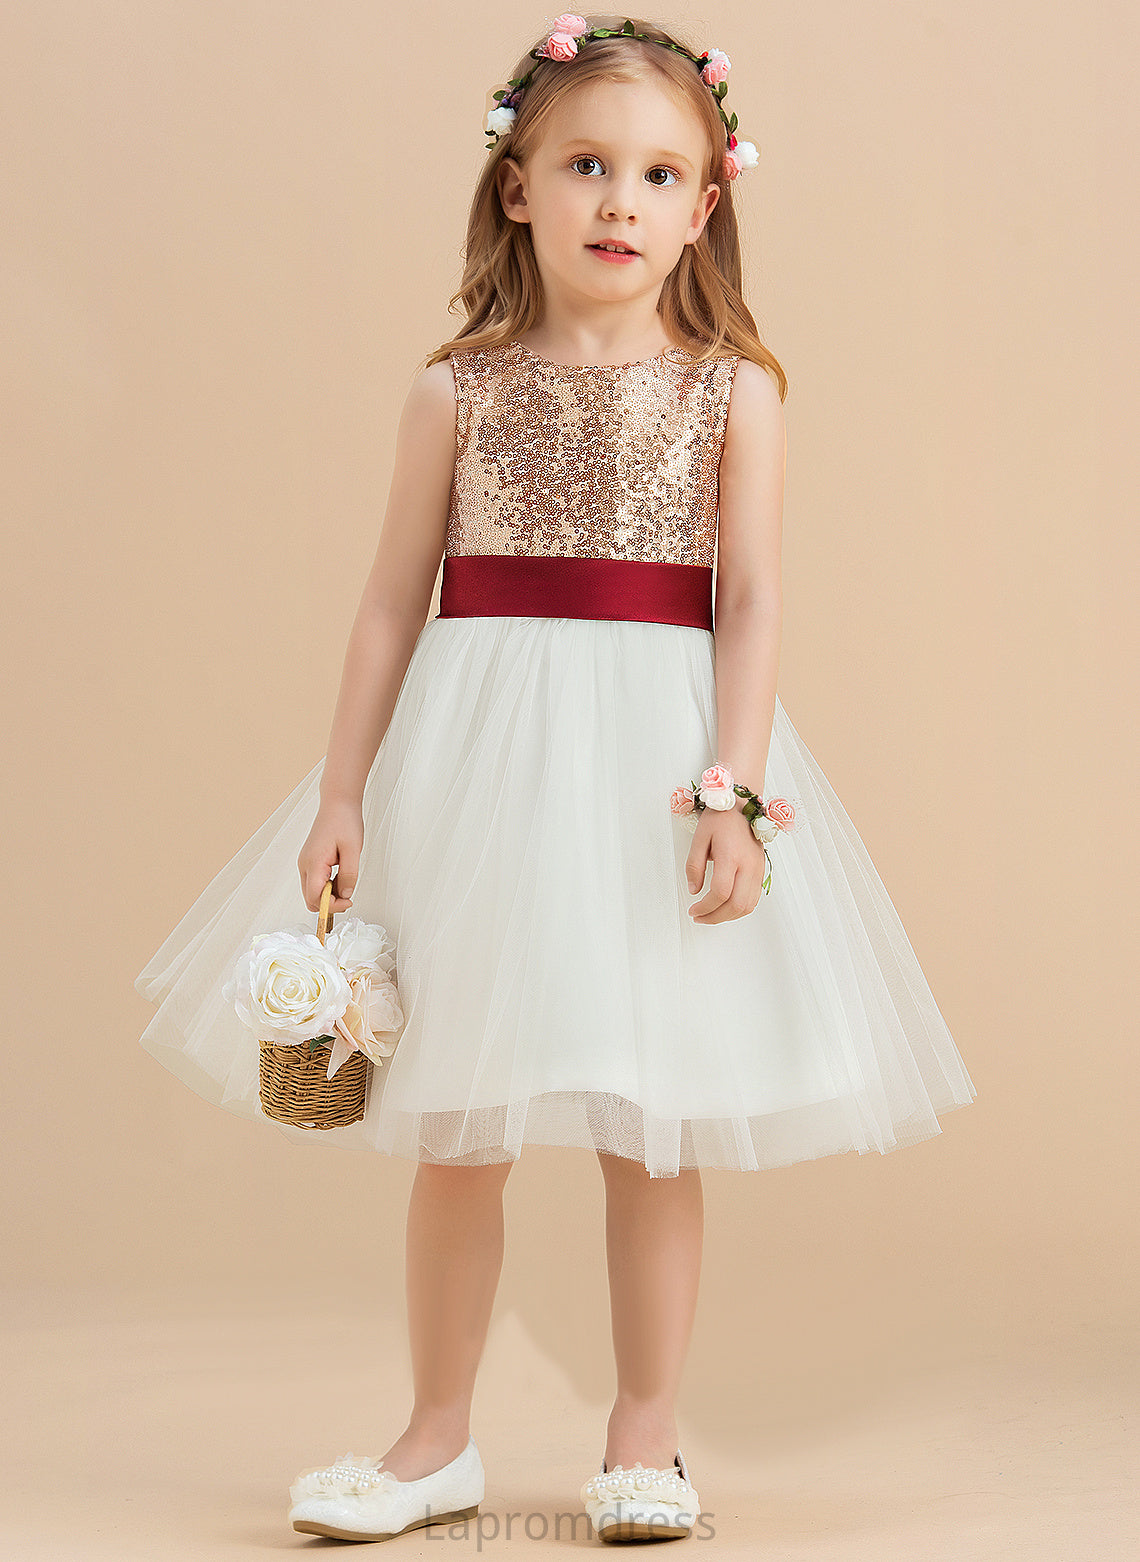 Amina sash) Sequins/Bow(s) Flower Girl Dresses Knee-length (Undetachable Satin/Tulle/Sequined Girl Flower Dress - Neck Sleeveless Scoop With A-Line